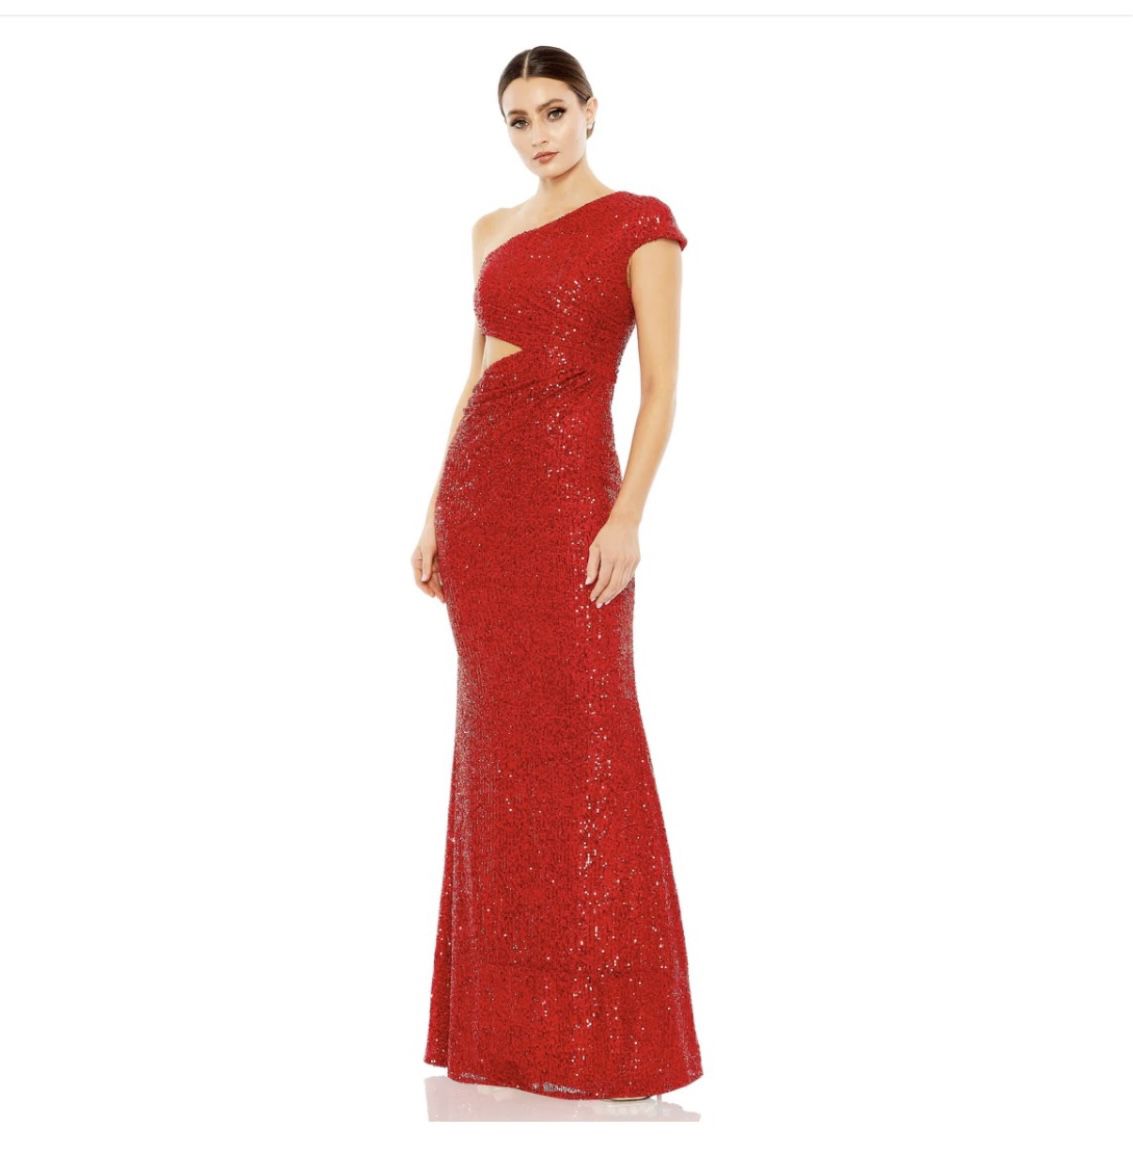 Mac Duggal Red Sequined Cap sleeve Gown